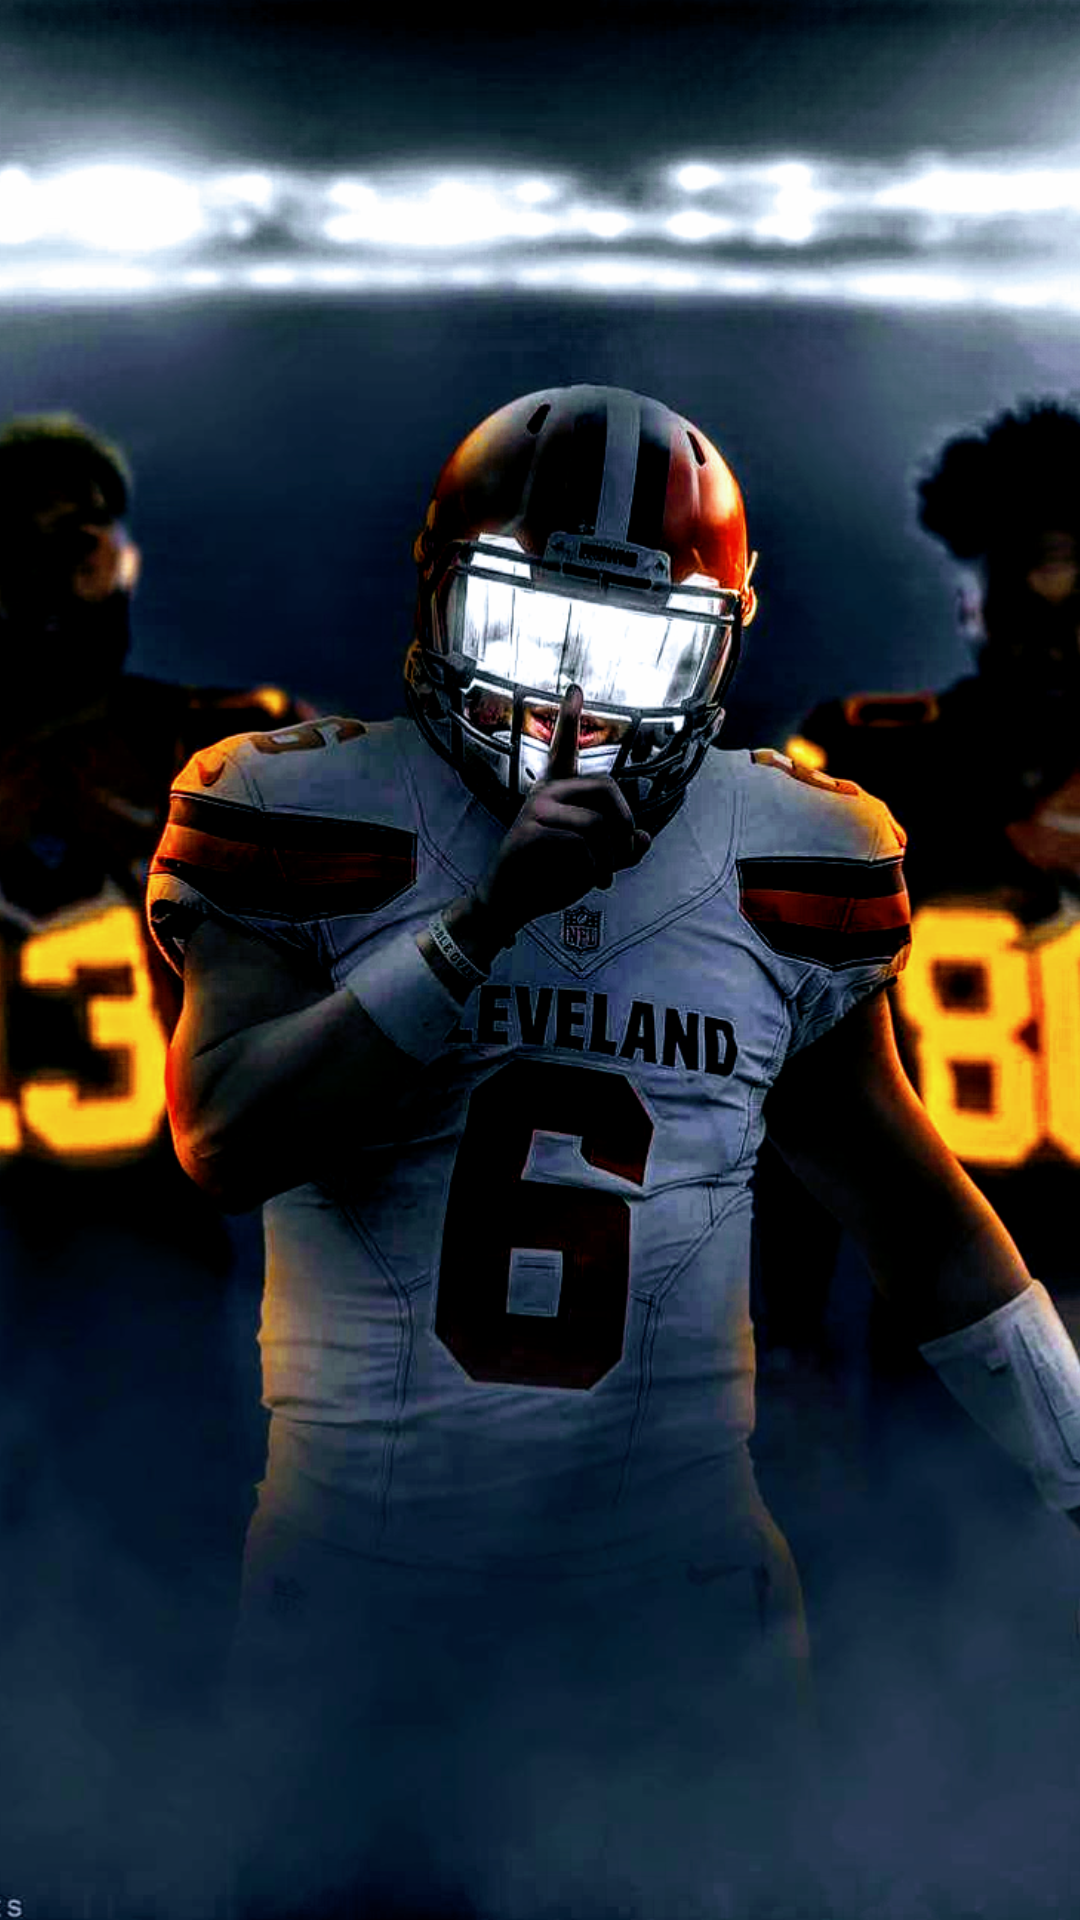 Cleveland Browns Logo Wallpapers  Top 20 Best Cleveland Browns Logo  Wallpapers  HQ 